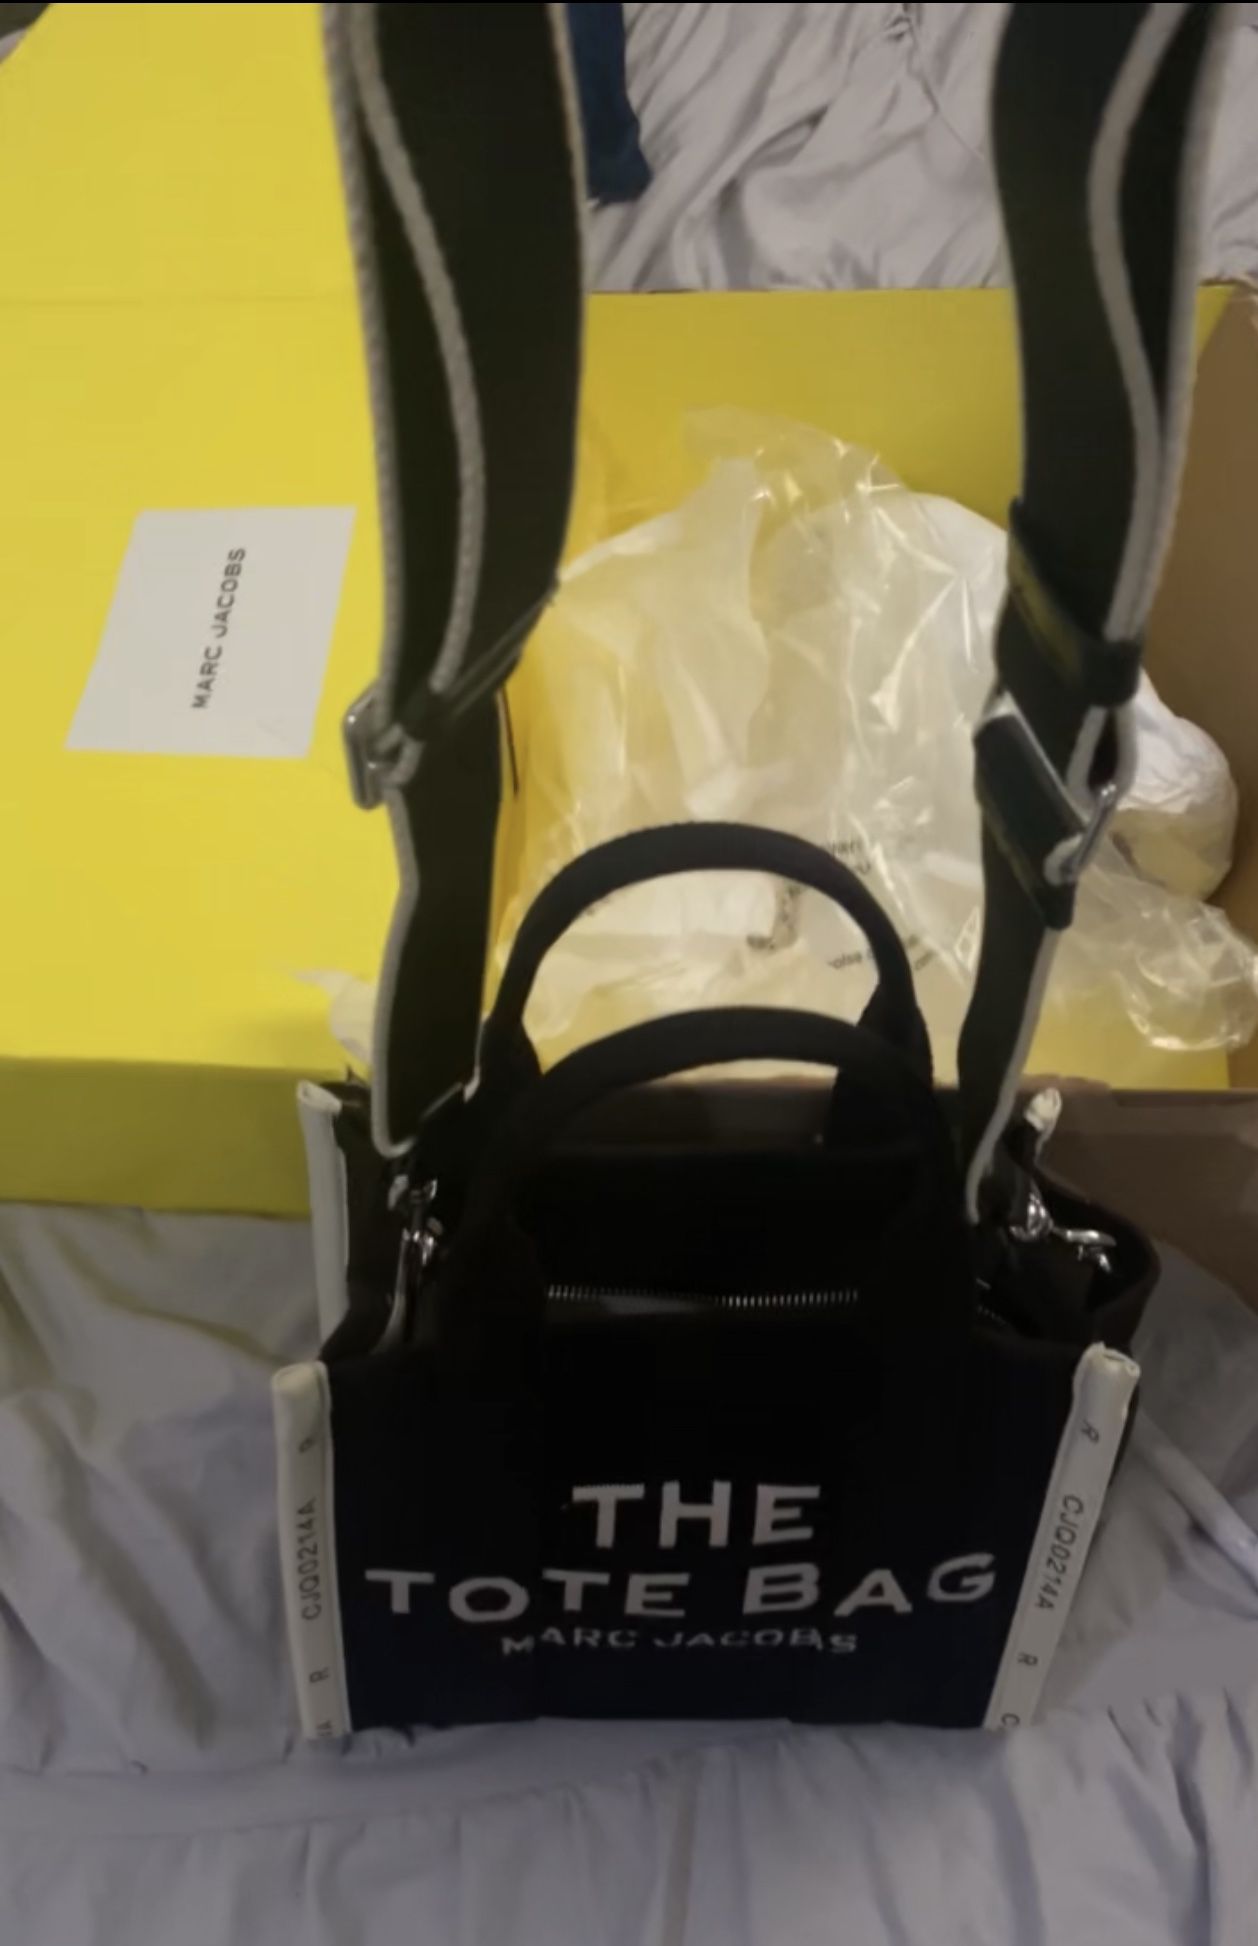 THE TOTE BAG MARC JACOBS 